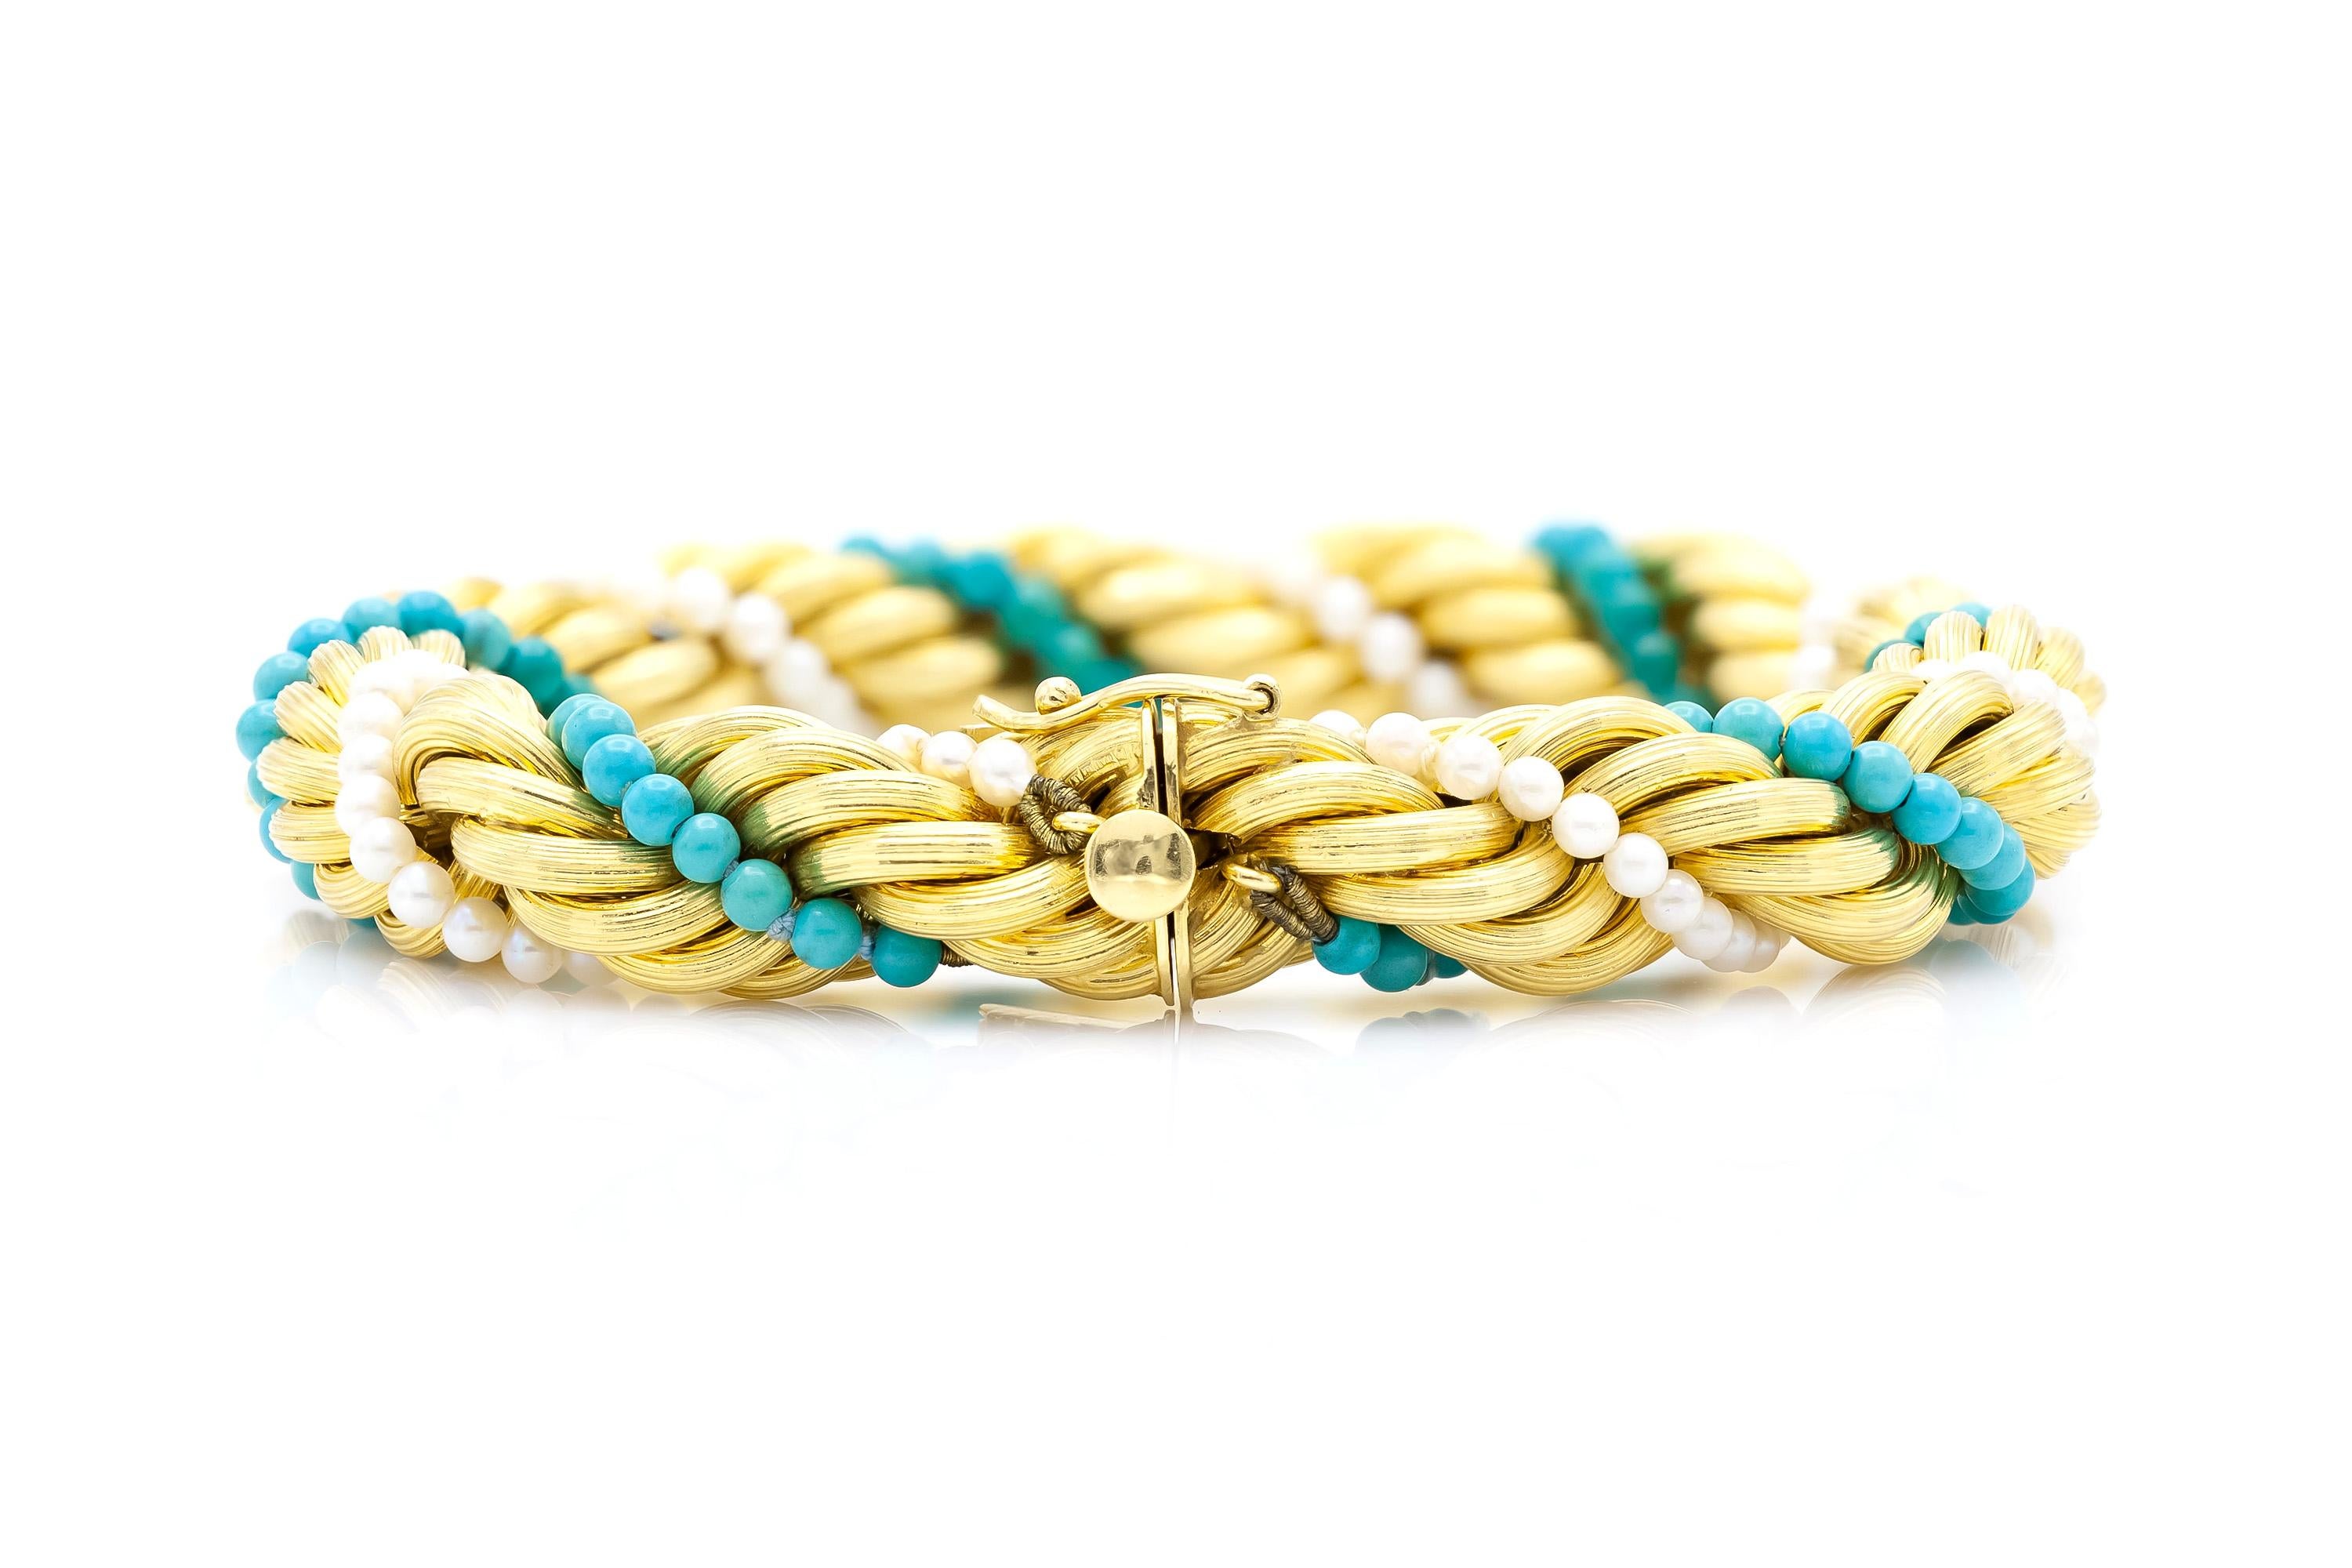 Finely crafted in 18k yellow gold with Turquoise beads and Pearls.
Size 8 1/8 inches.